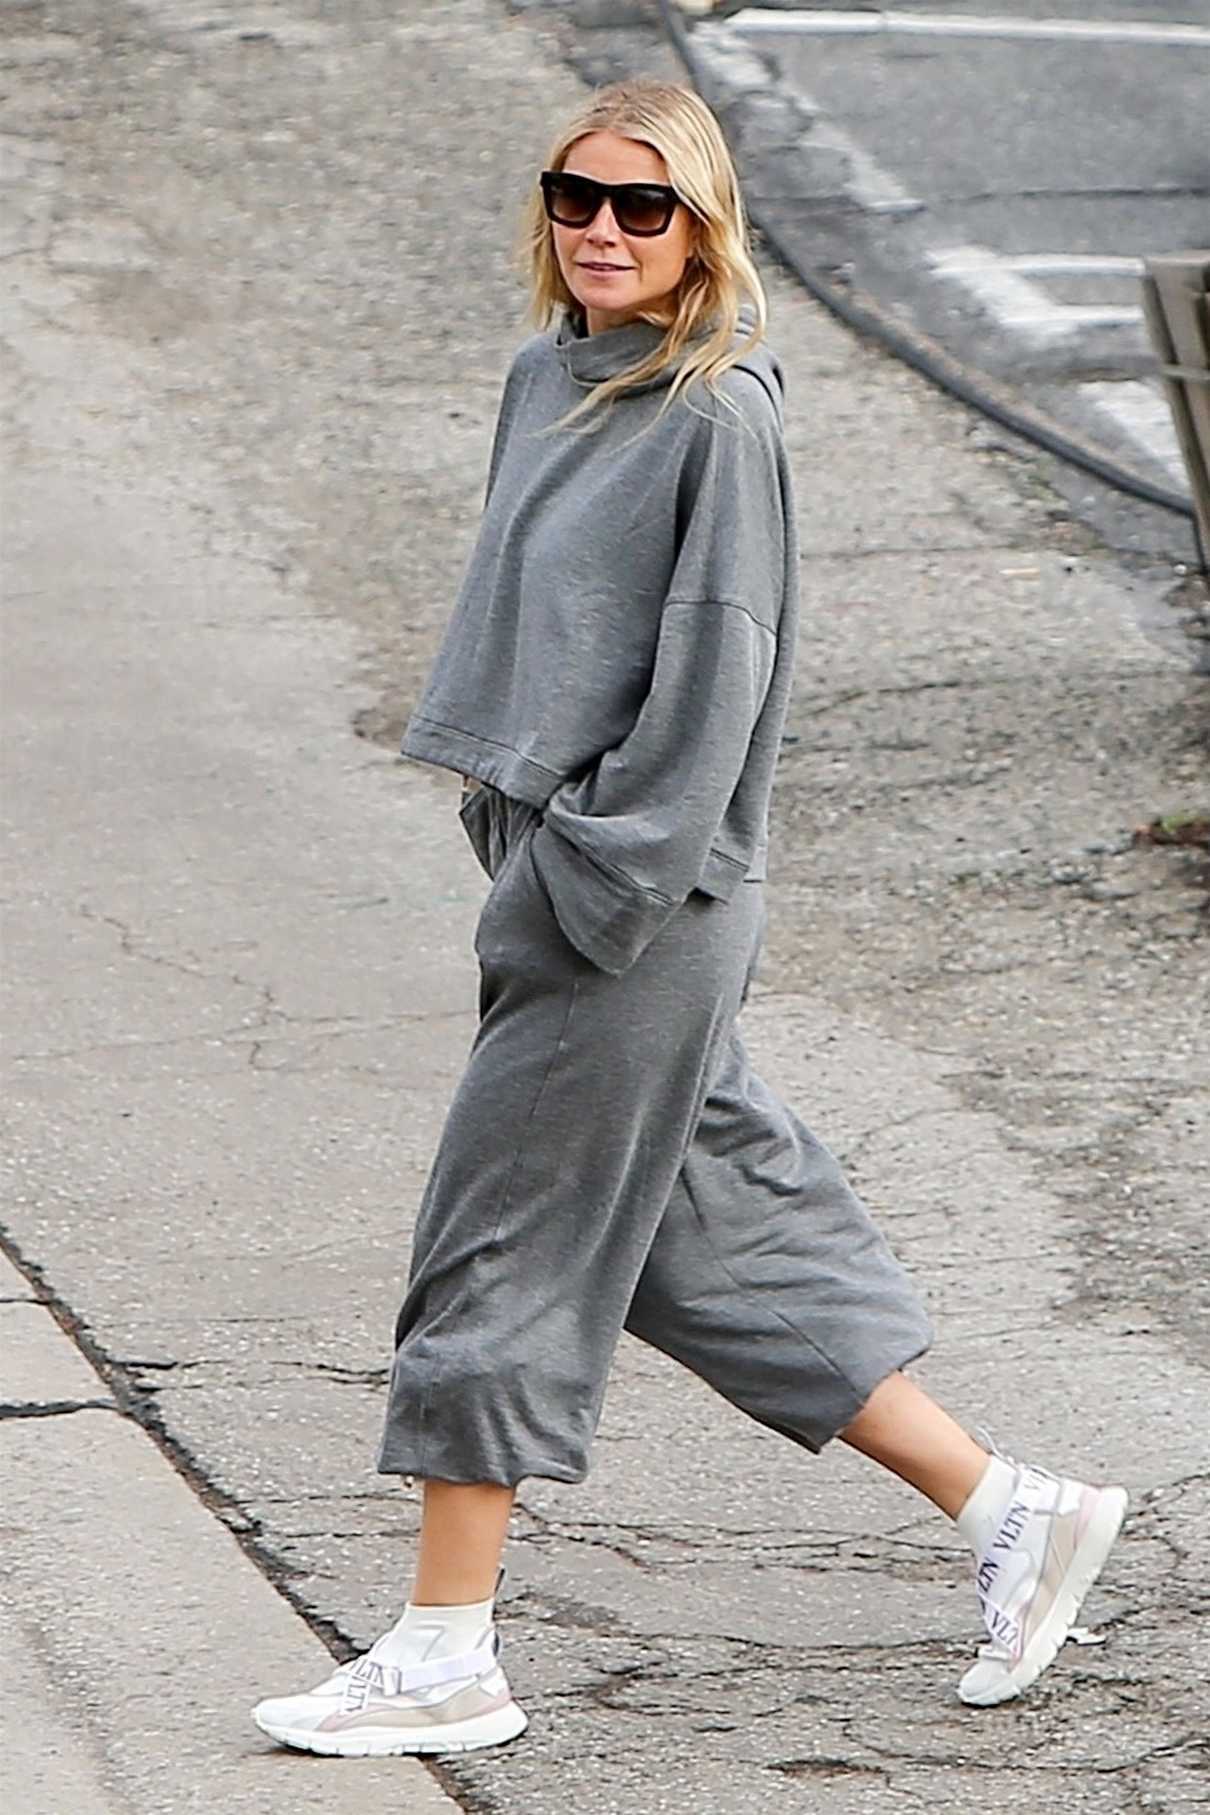 Gwyneth Paltrow in a Gray Jogging Suit Was Seen Out in Brentwood 01/13 ...